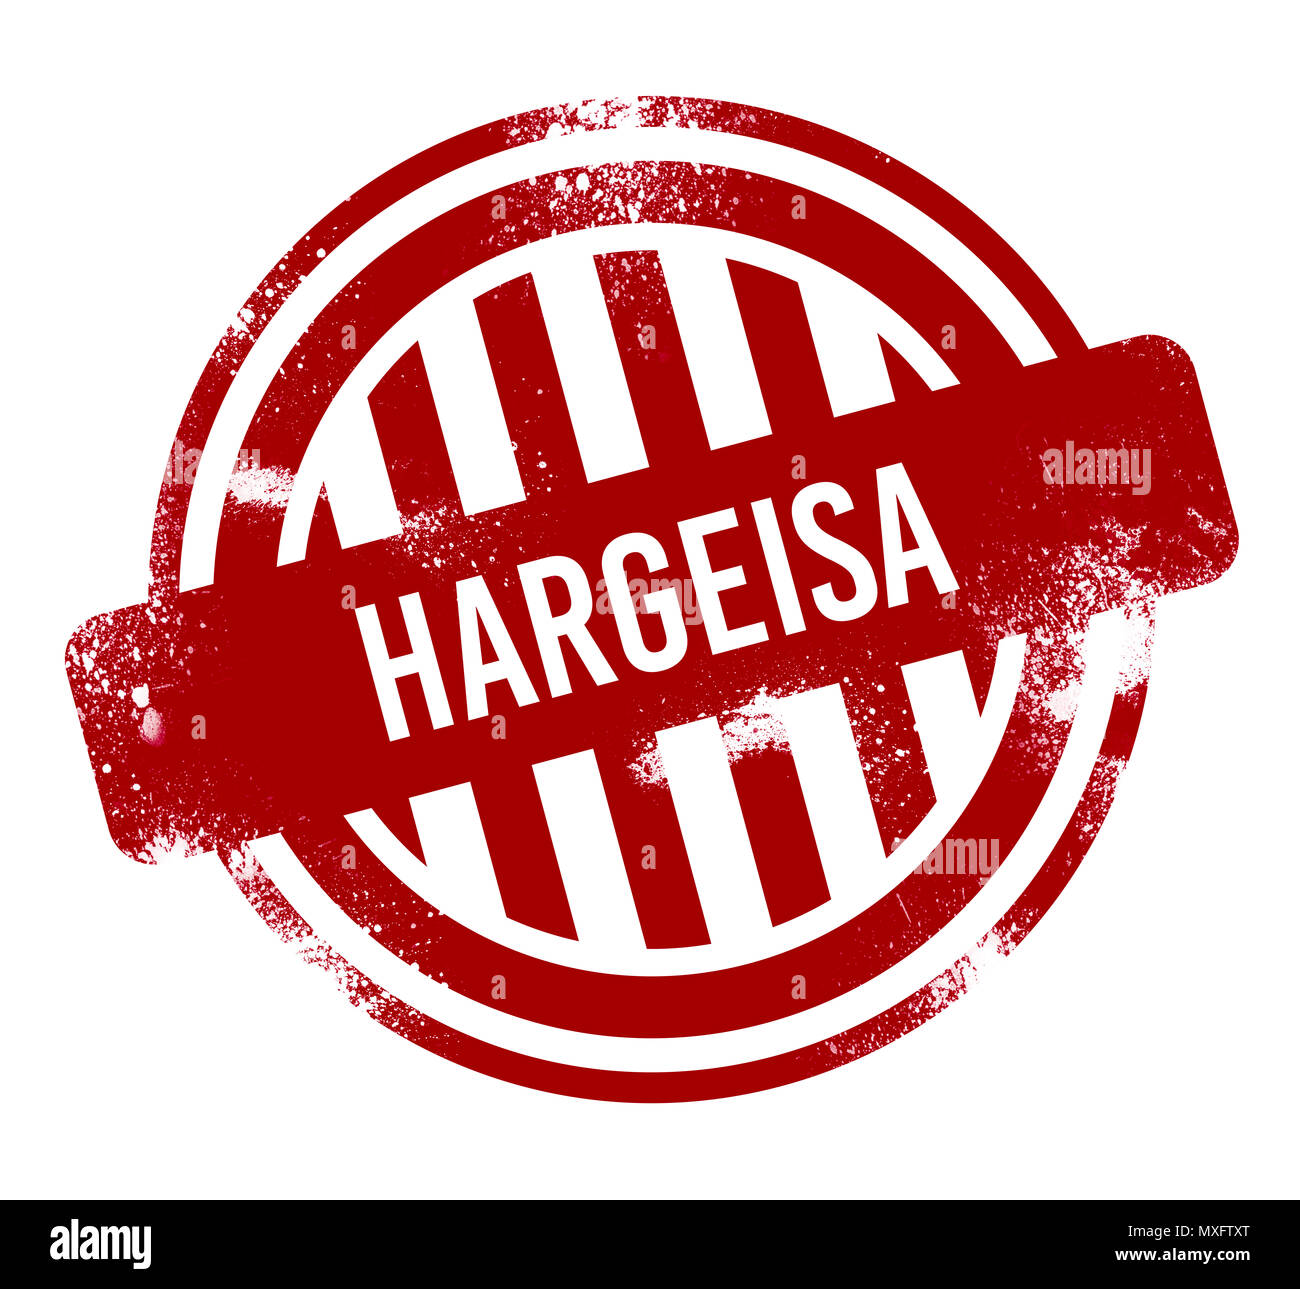 Hargeisa - Red grunge button, stamp Stock Photo